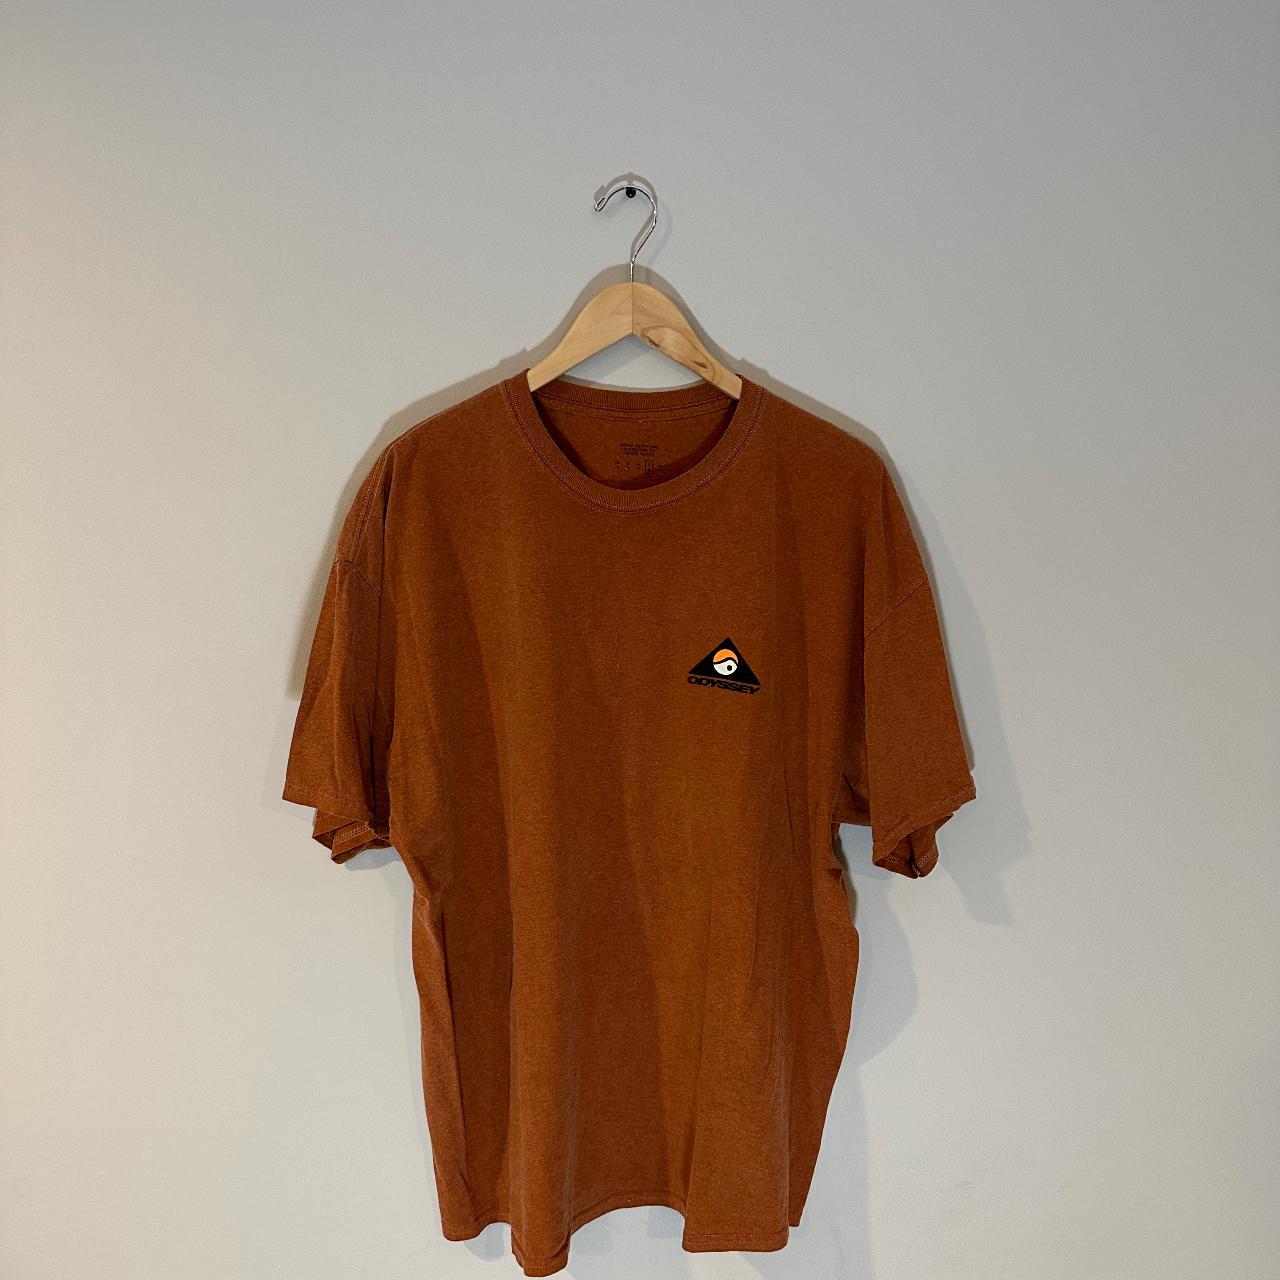 Urban Outfitters Men's Brown and Orange T-shirt